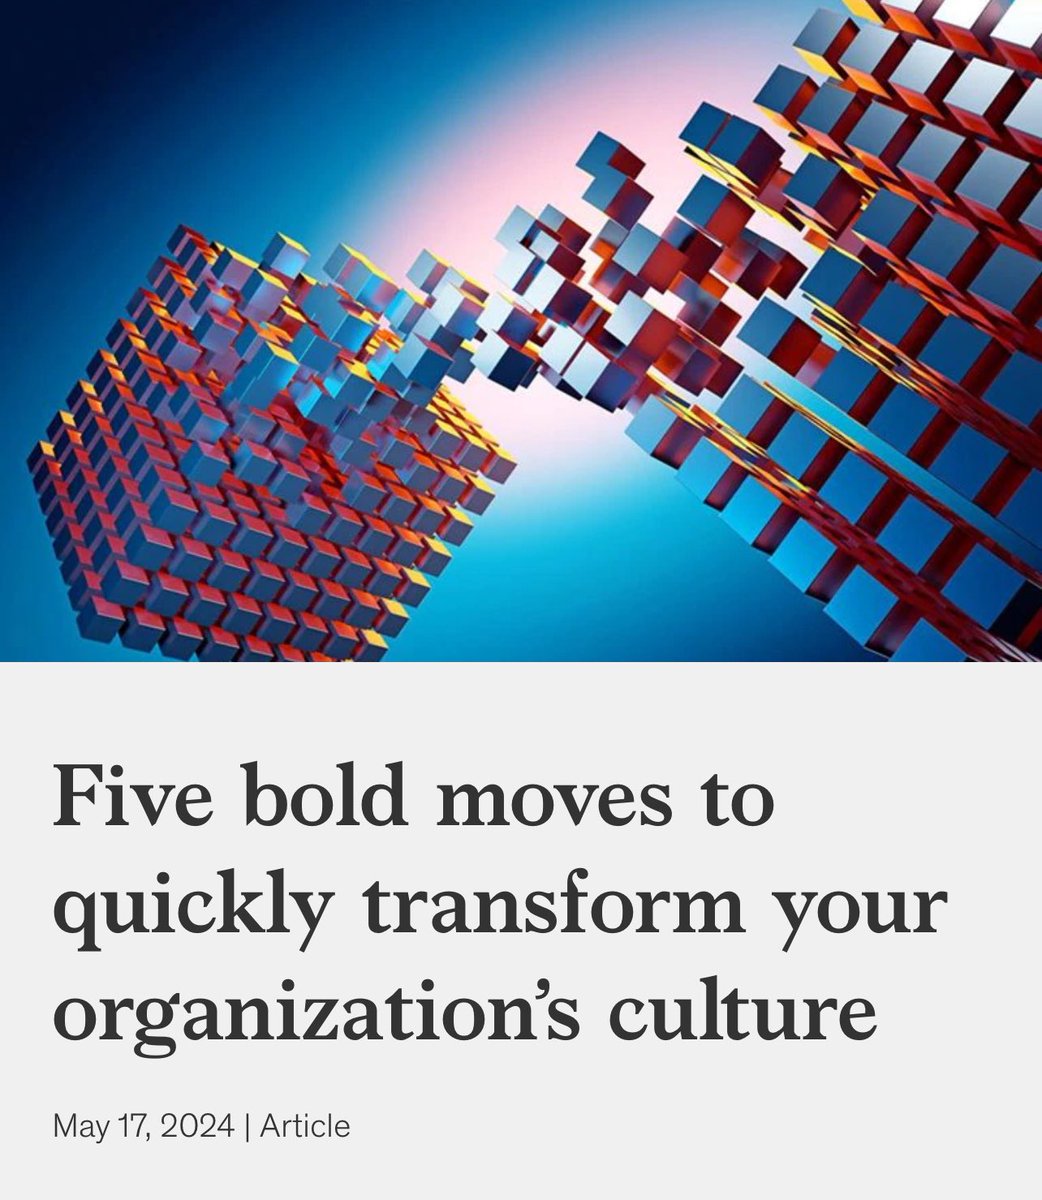 “An #InclusiveCulture is now a must for companies that want to meet talent, performance, and productivity objectives. Five moves can help #leaders accelerate the process of turning around their cultures.” —@McKinsey

“A #CognitiveCulture is vital.” —JRDjr

mckinsey.com/capabilities/p…